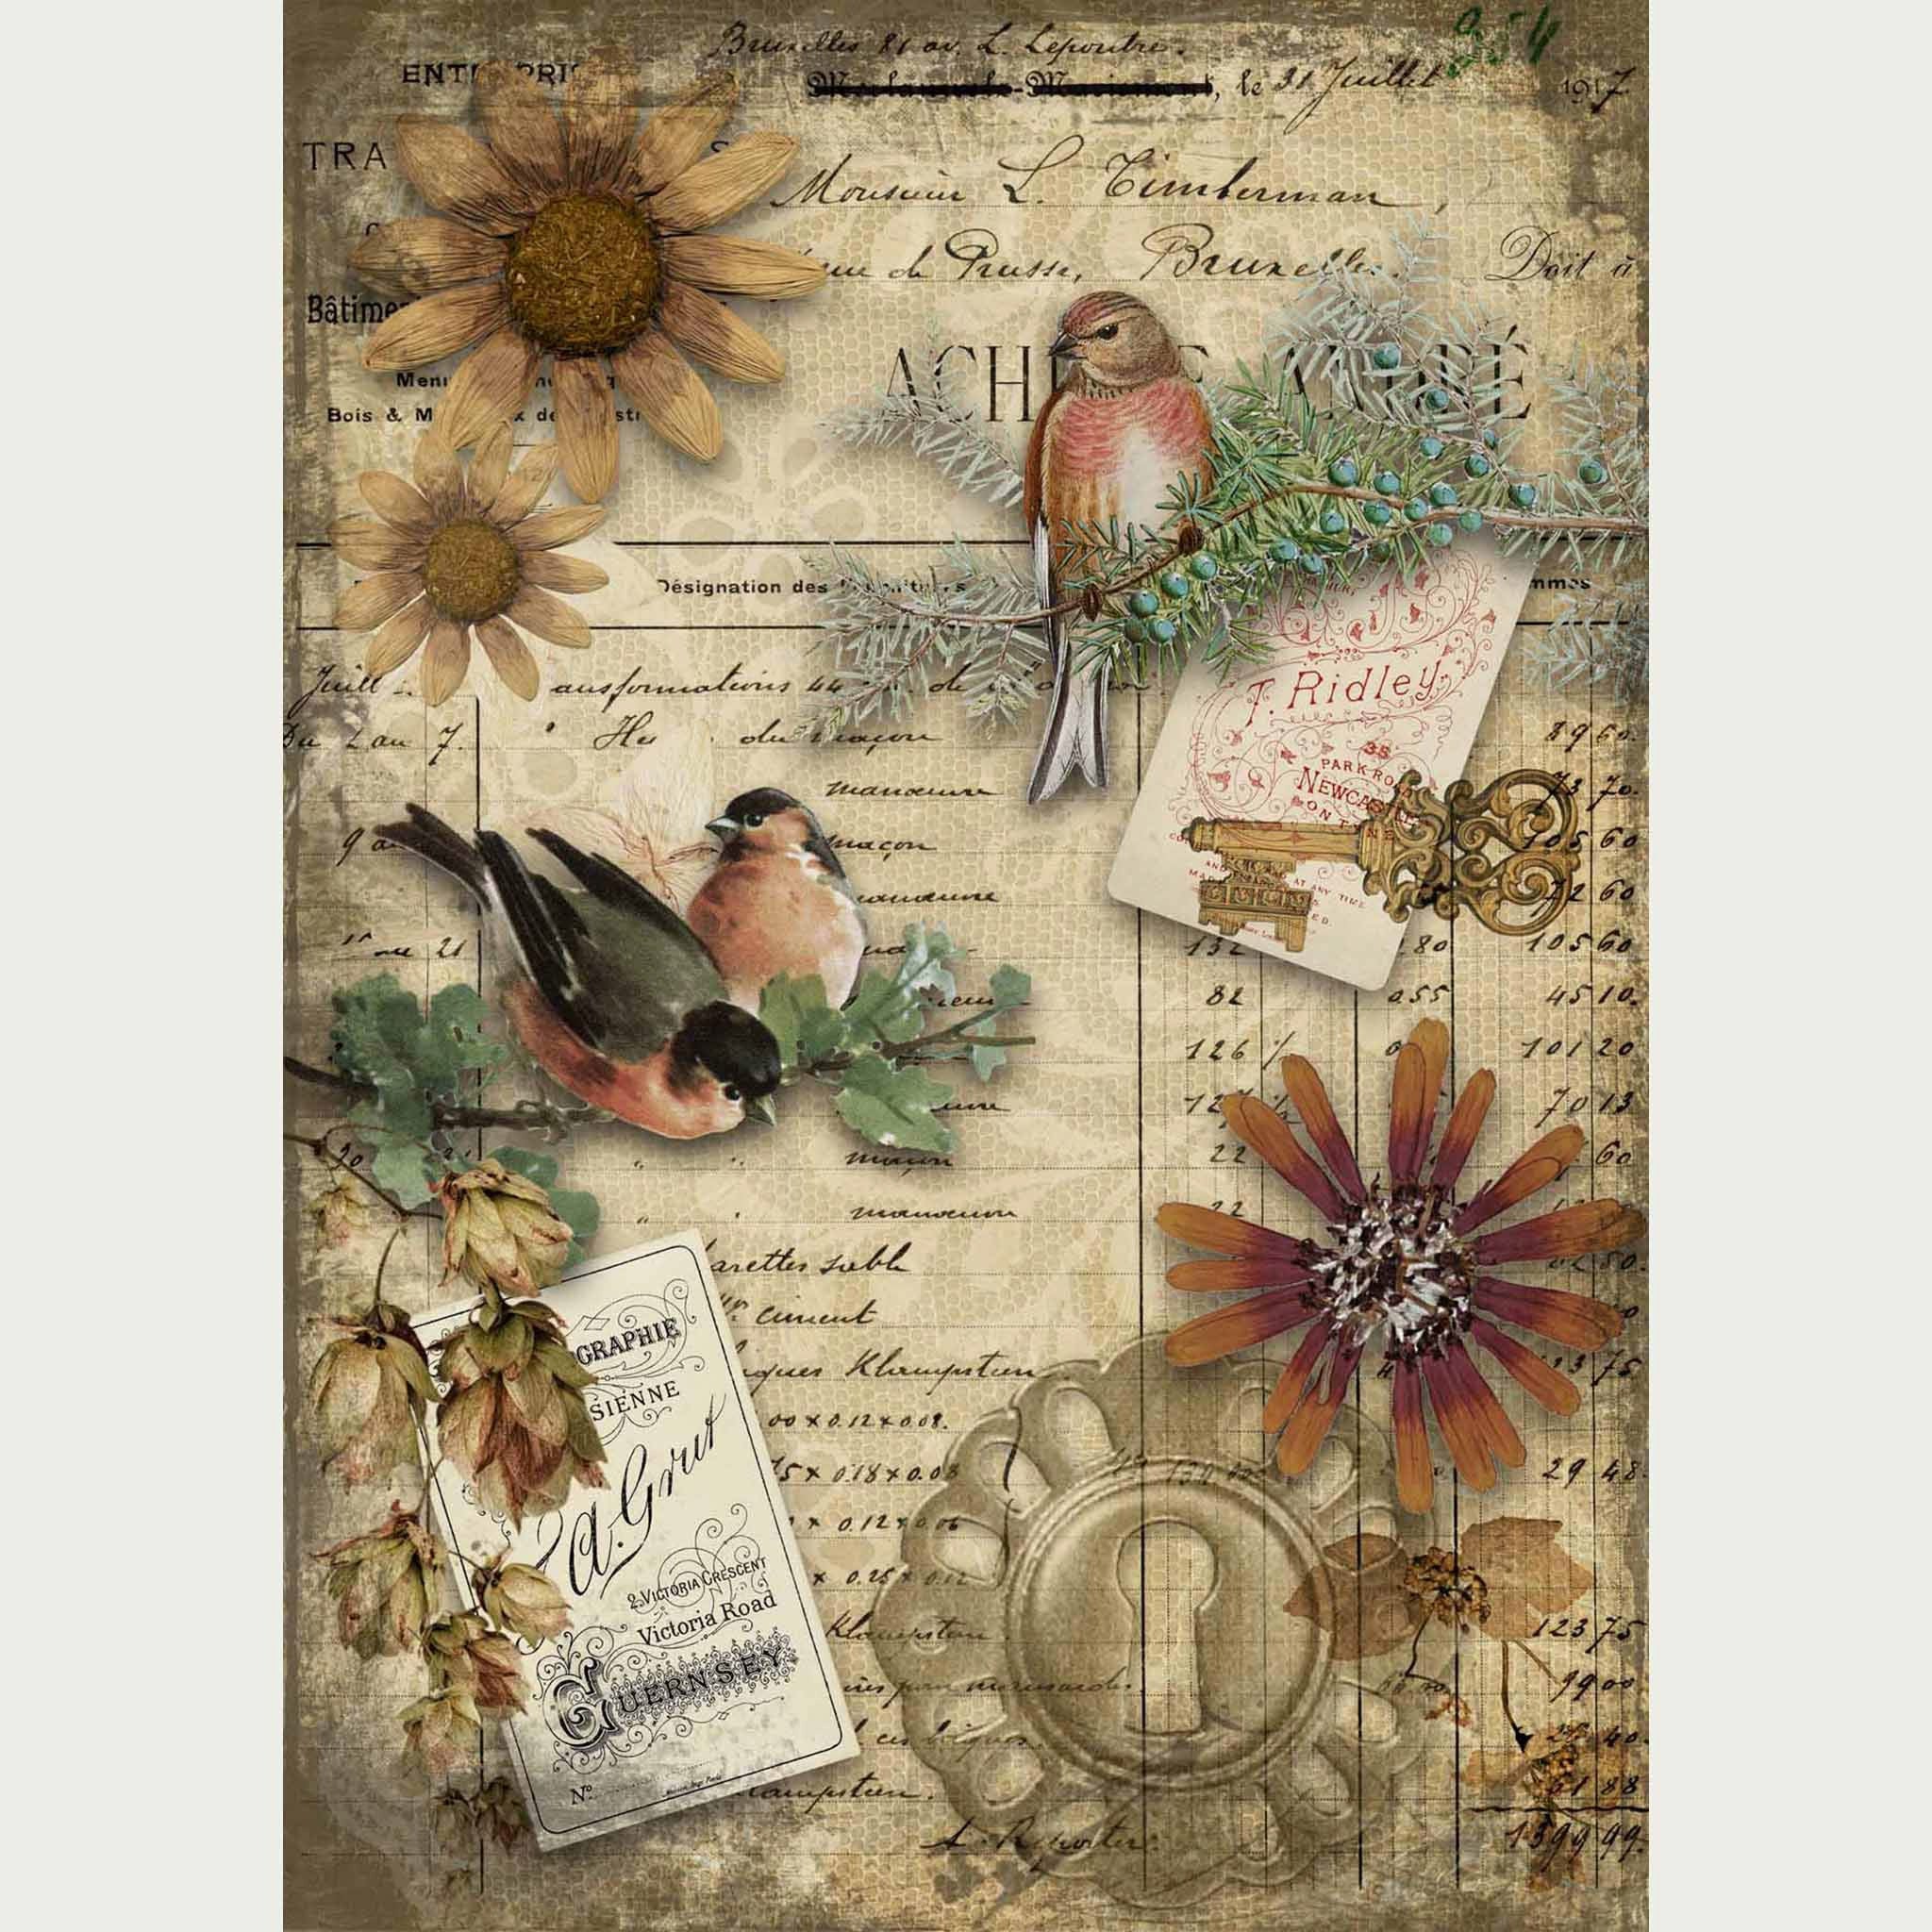 A0 rice paper design that  features flowers, a key and keyhole, and birds perched on leafy branches against a backdrop of a vintage receipt. White borders on the sides.